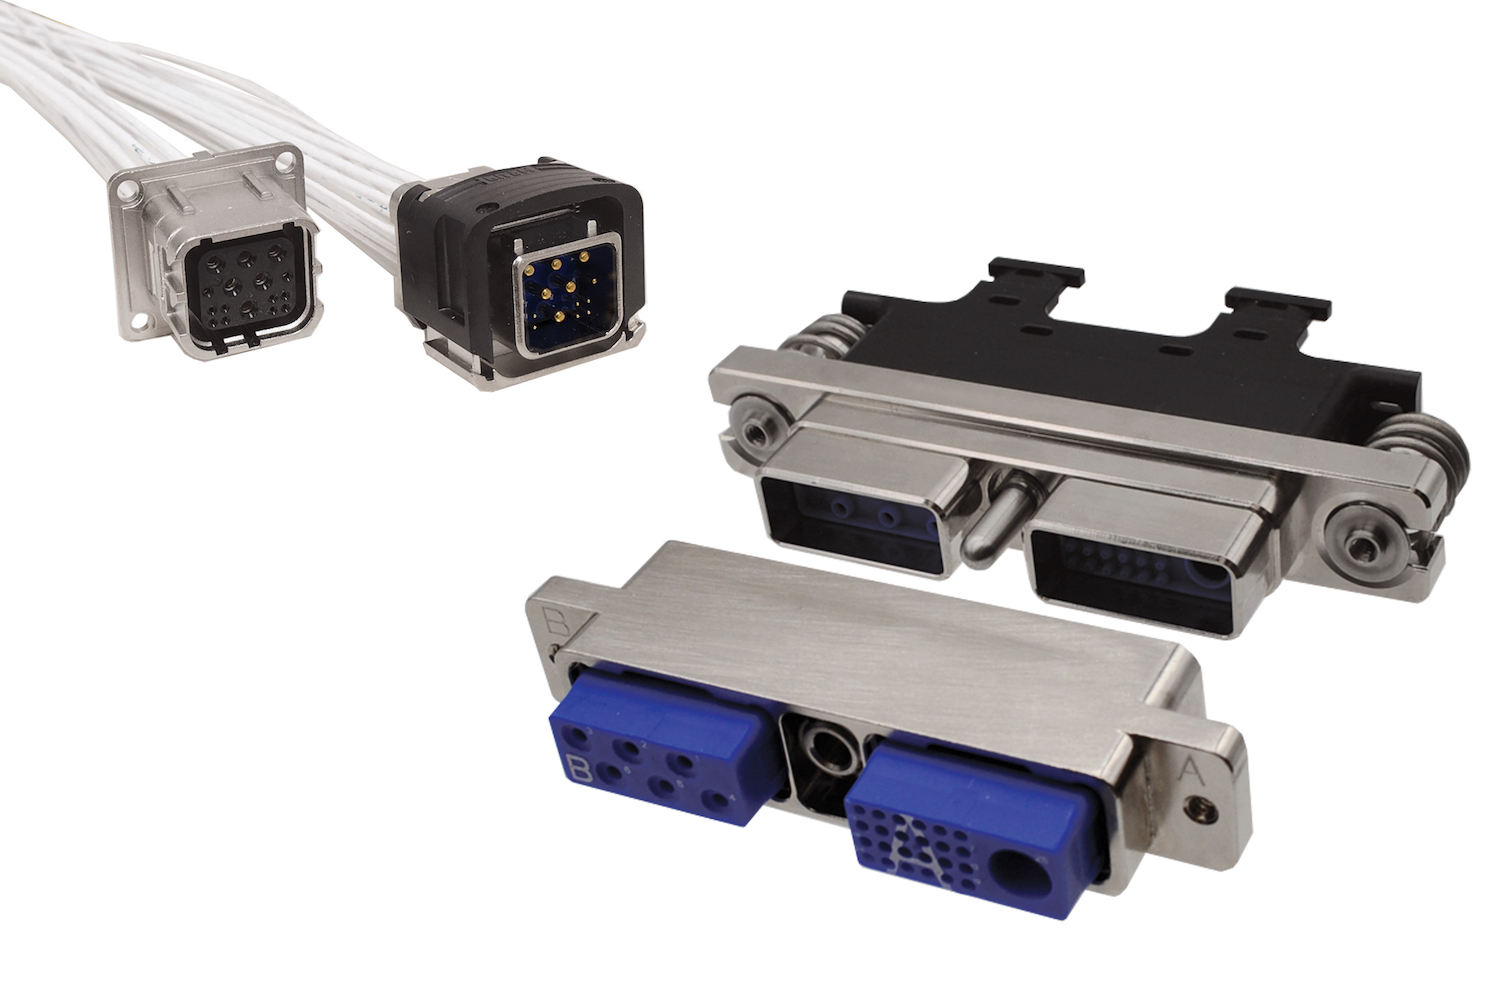 ARINC Rack and Panel Connectors from Cinch